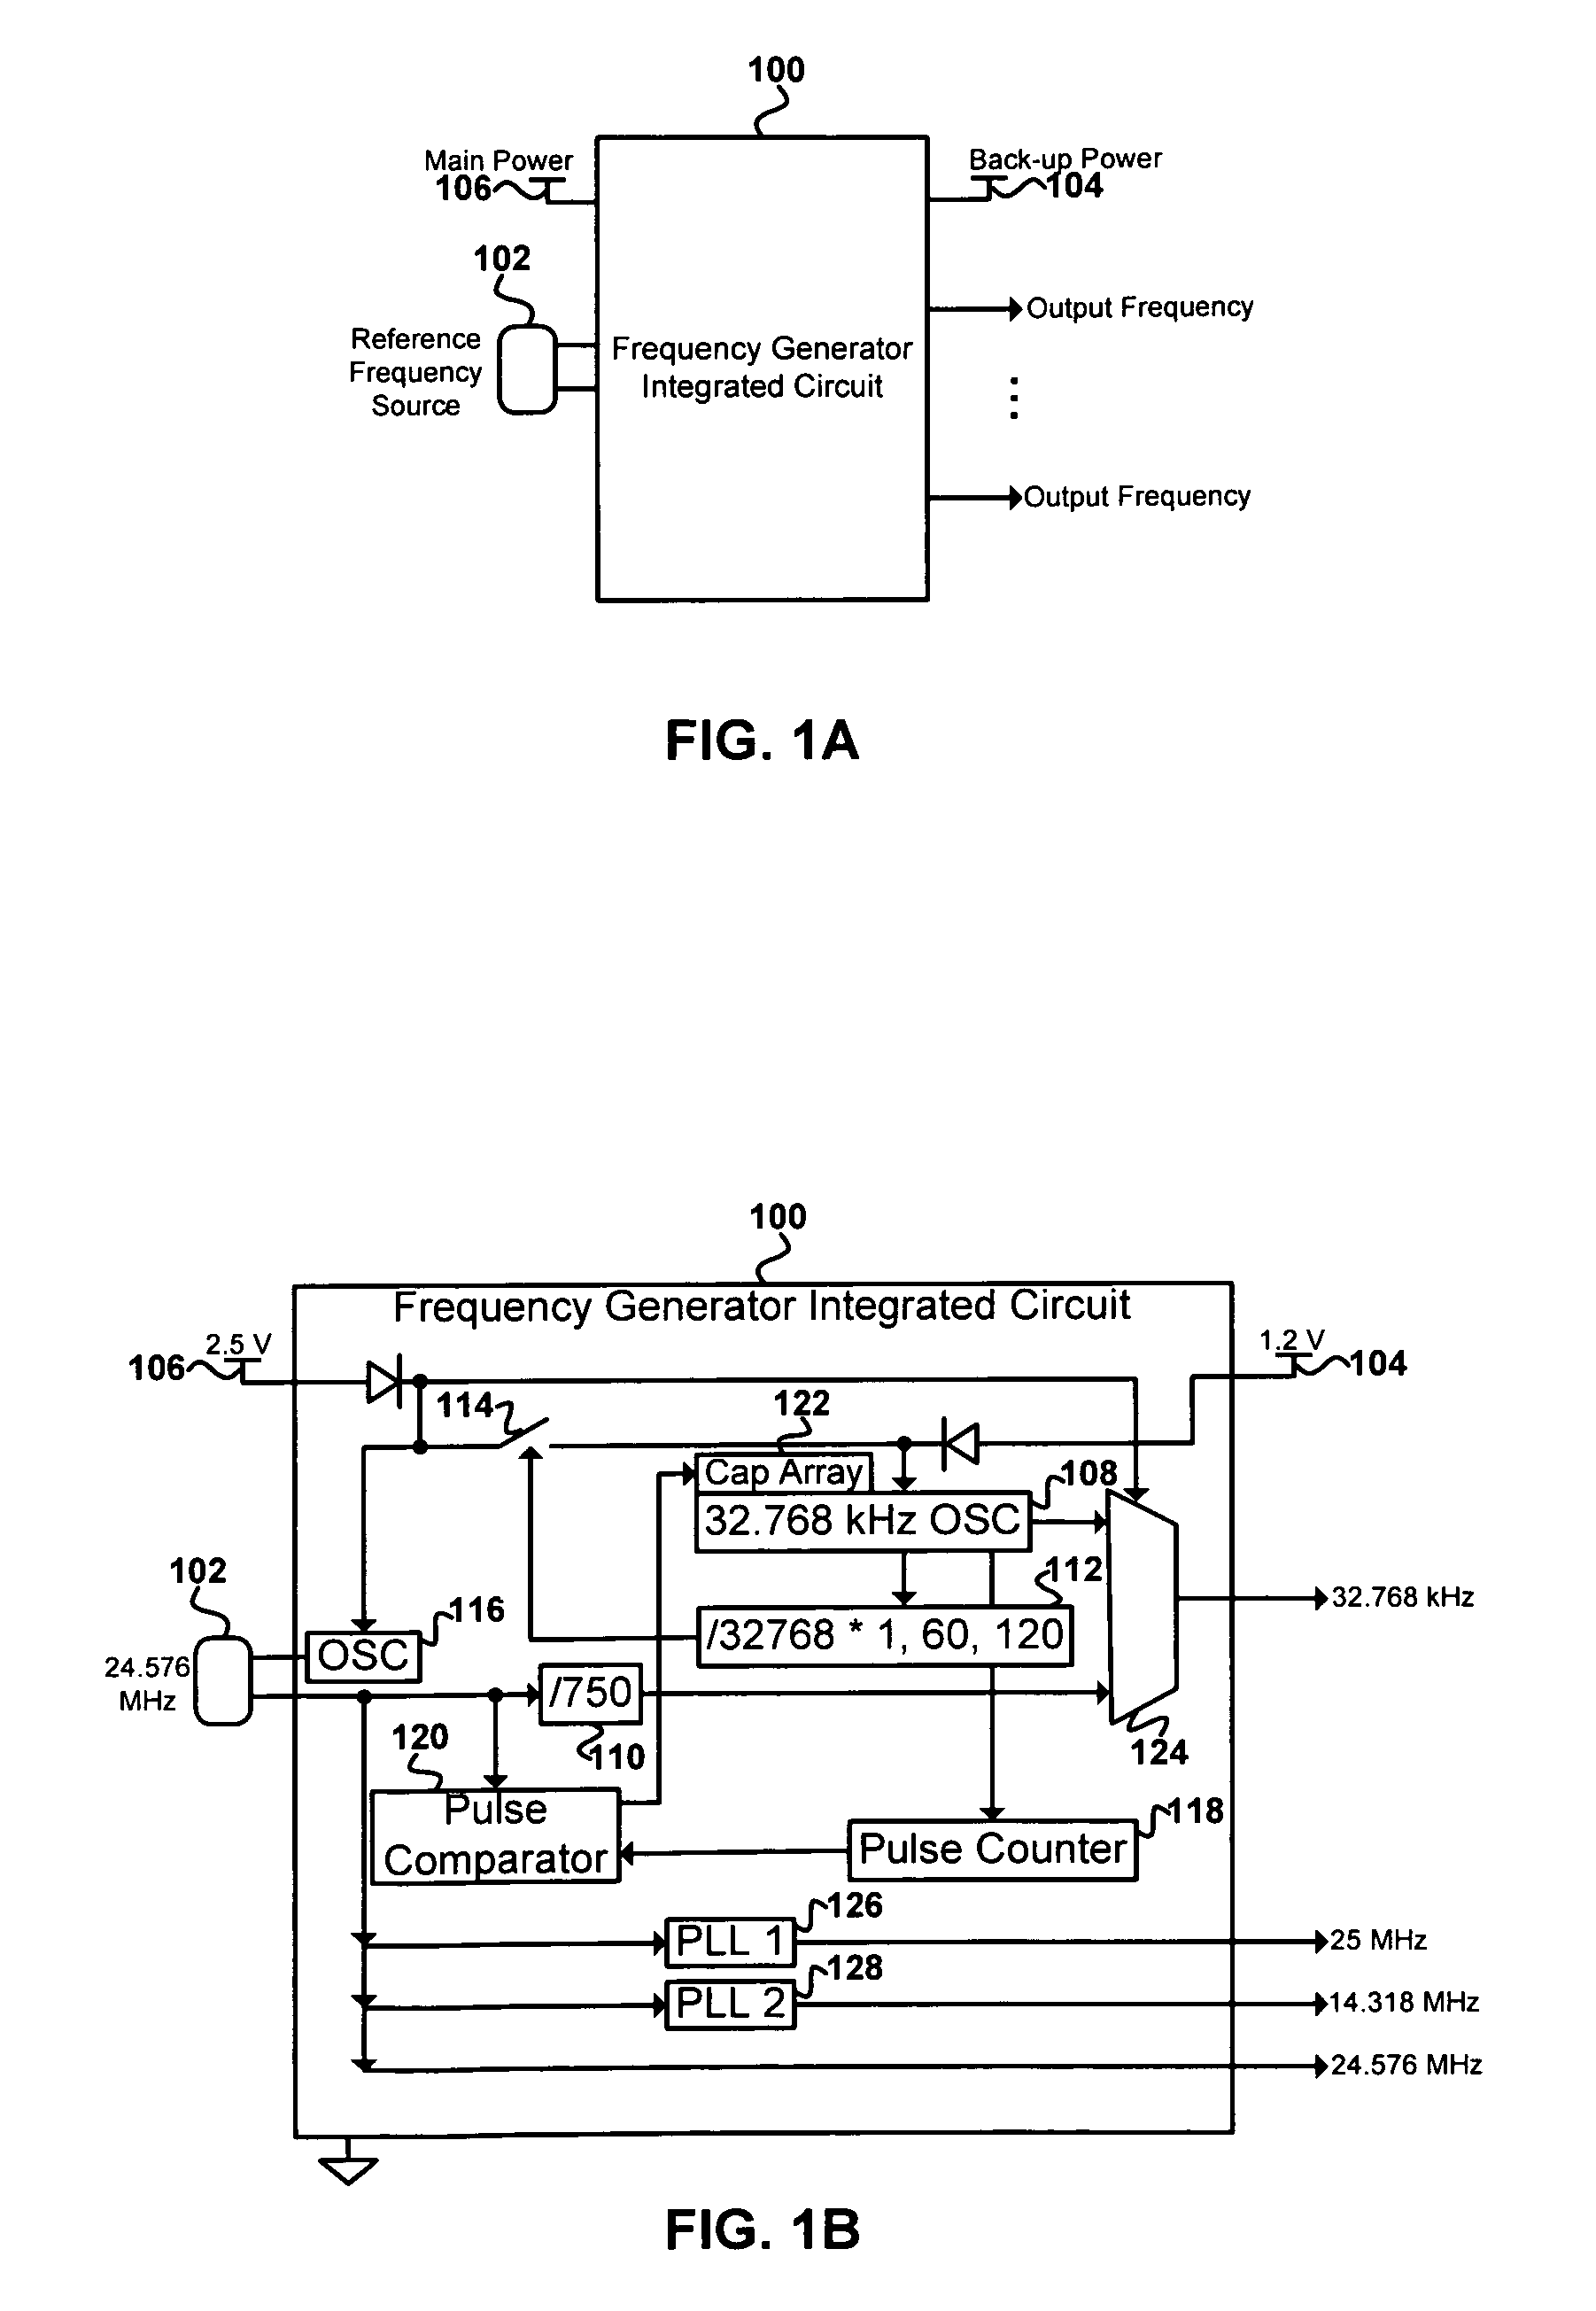 Integrated circuit frequency generator